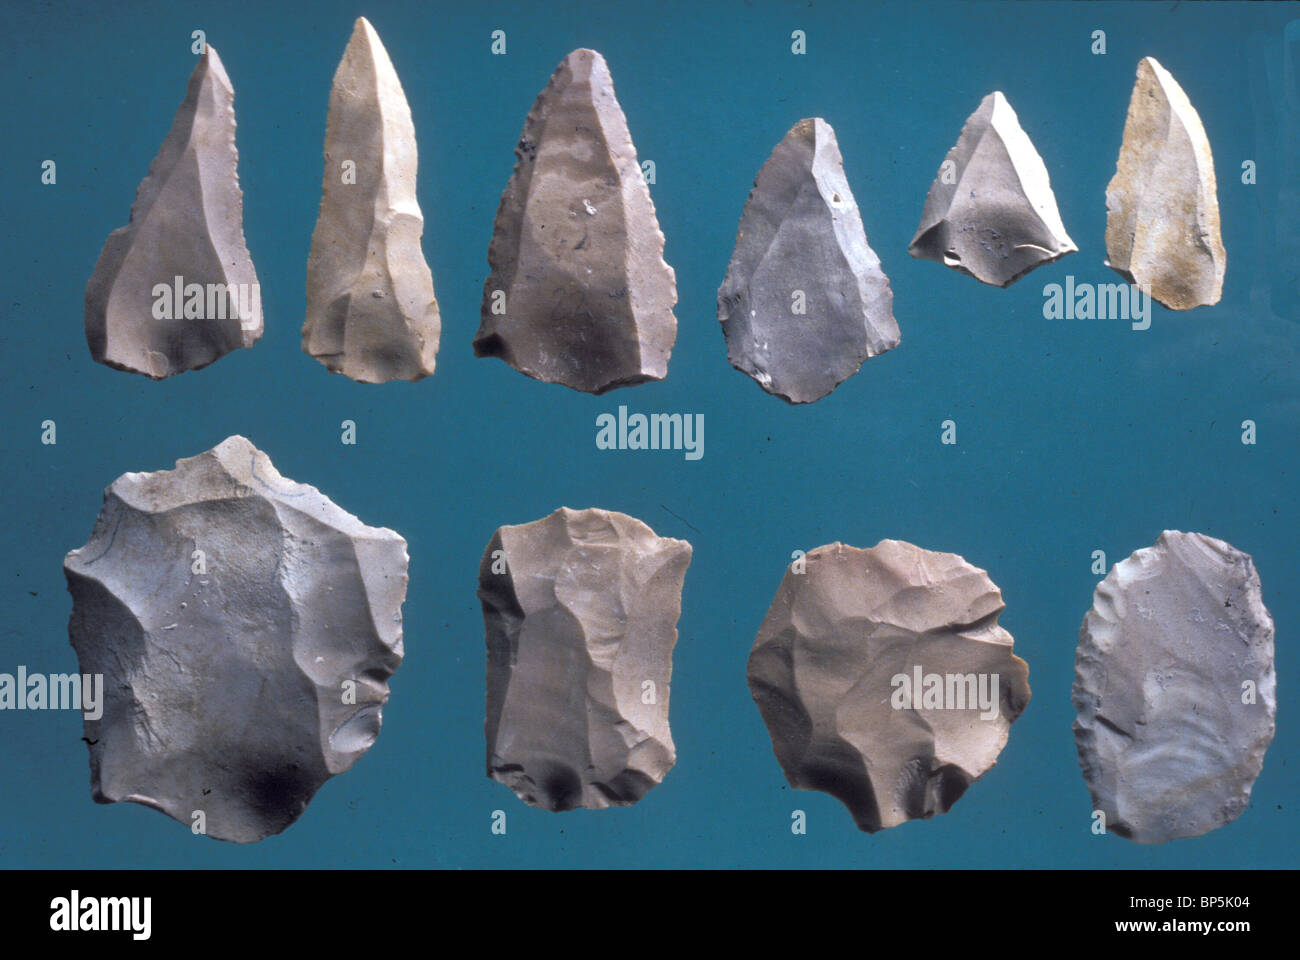 4390. PALEOLITHIC PERIOD, C. 10 - 8TH MILLENNIUM BC. FLINT STONE TOOLS, SCRAPERS AND LANCEHEADS Stock Photo